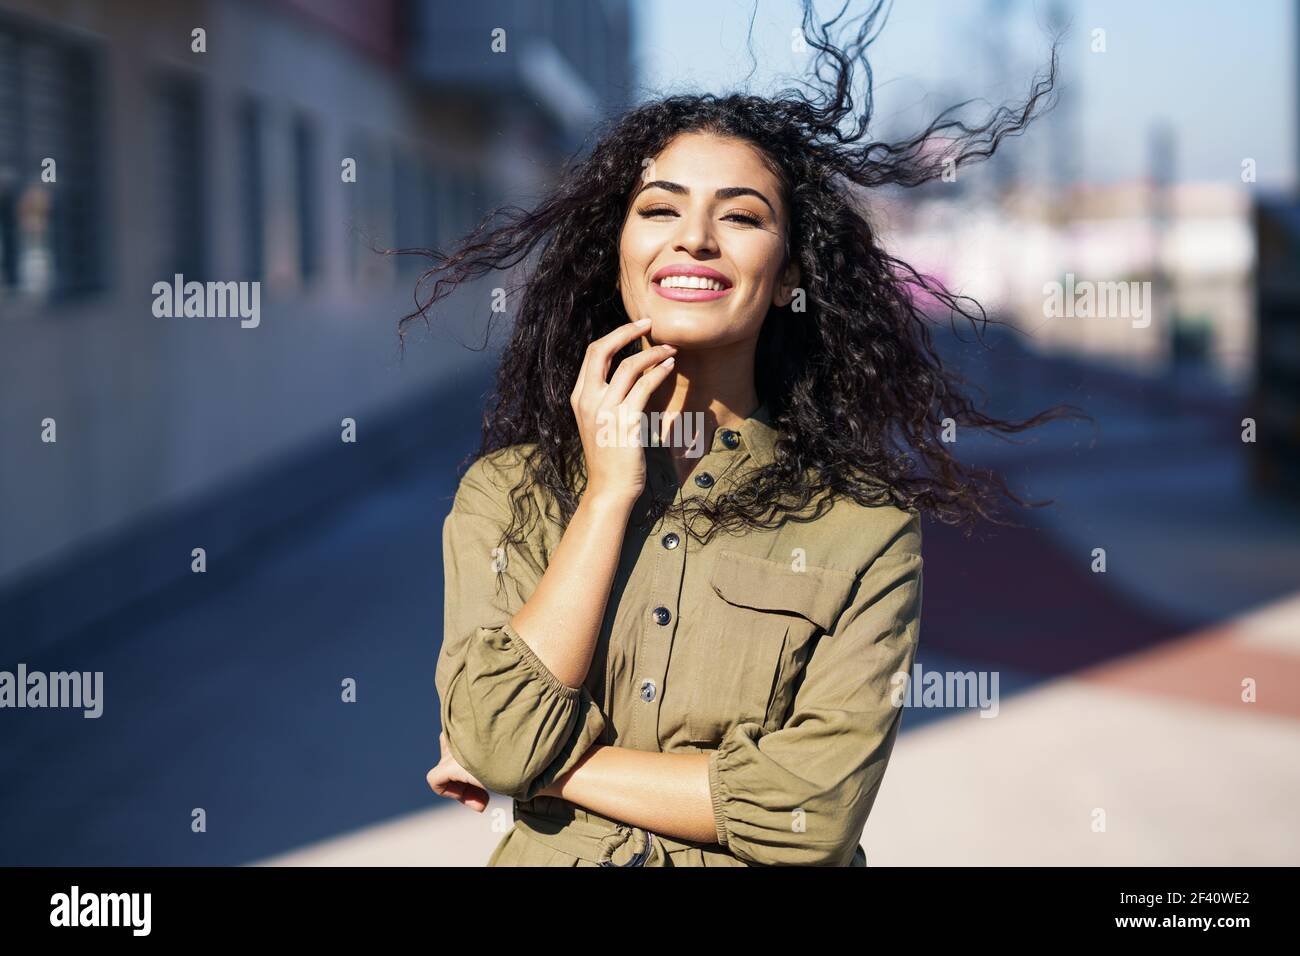 Arab woman with curly hair moved by the wind in urban background. Arab woman with curly hair moved by the wind Stock Photo